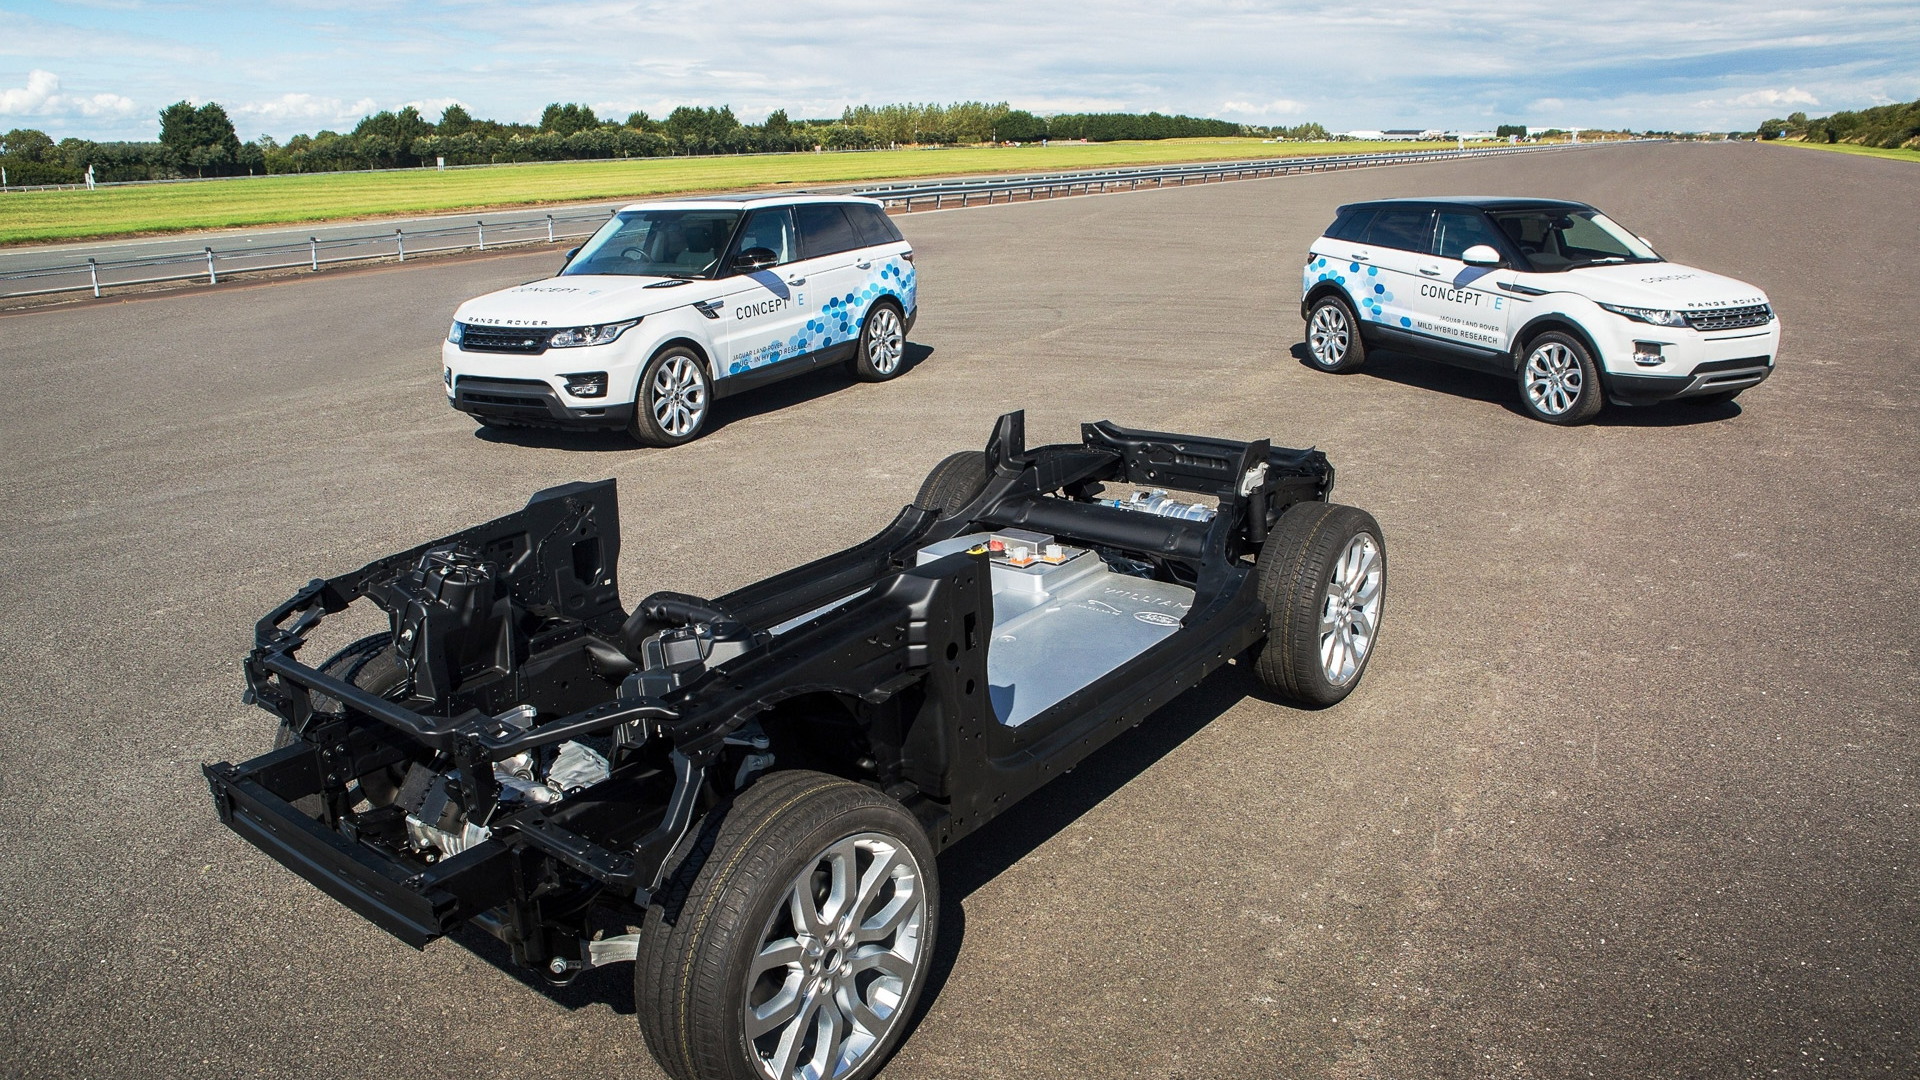 Range Rover Sport adds technology, power with · Select Engineering